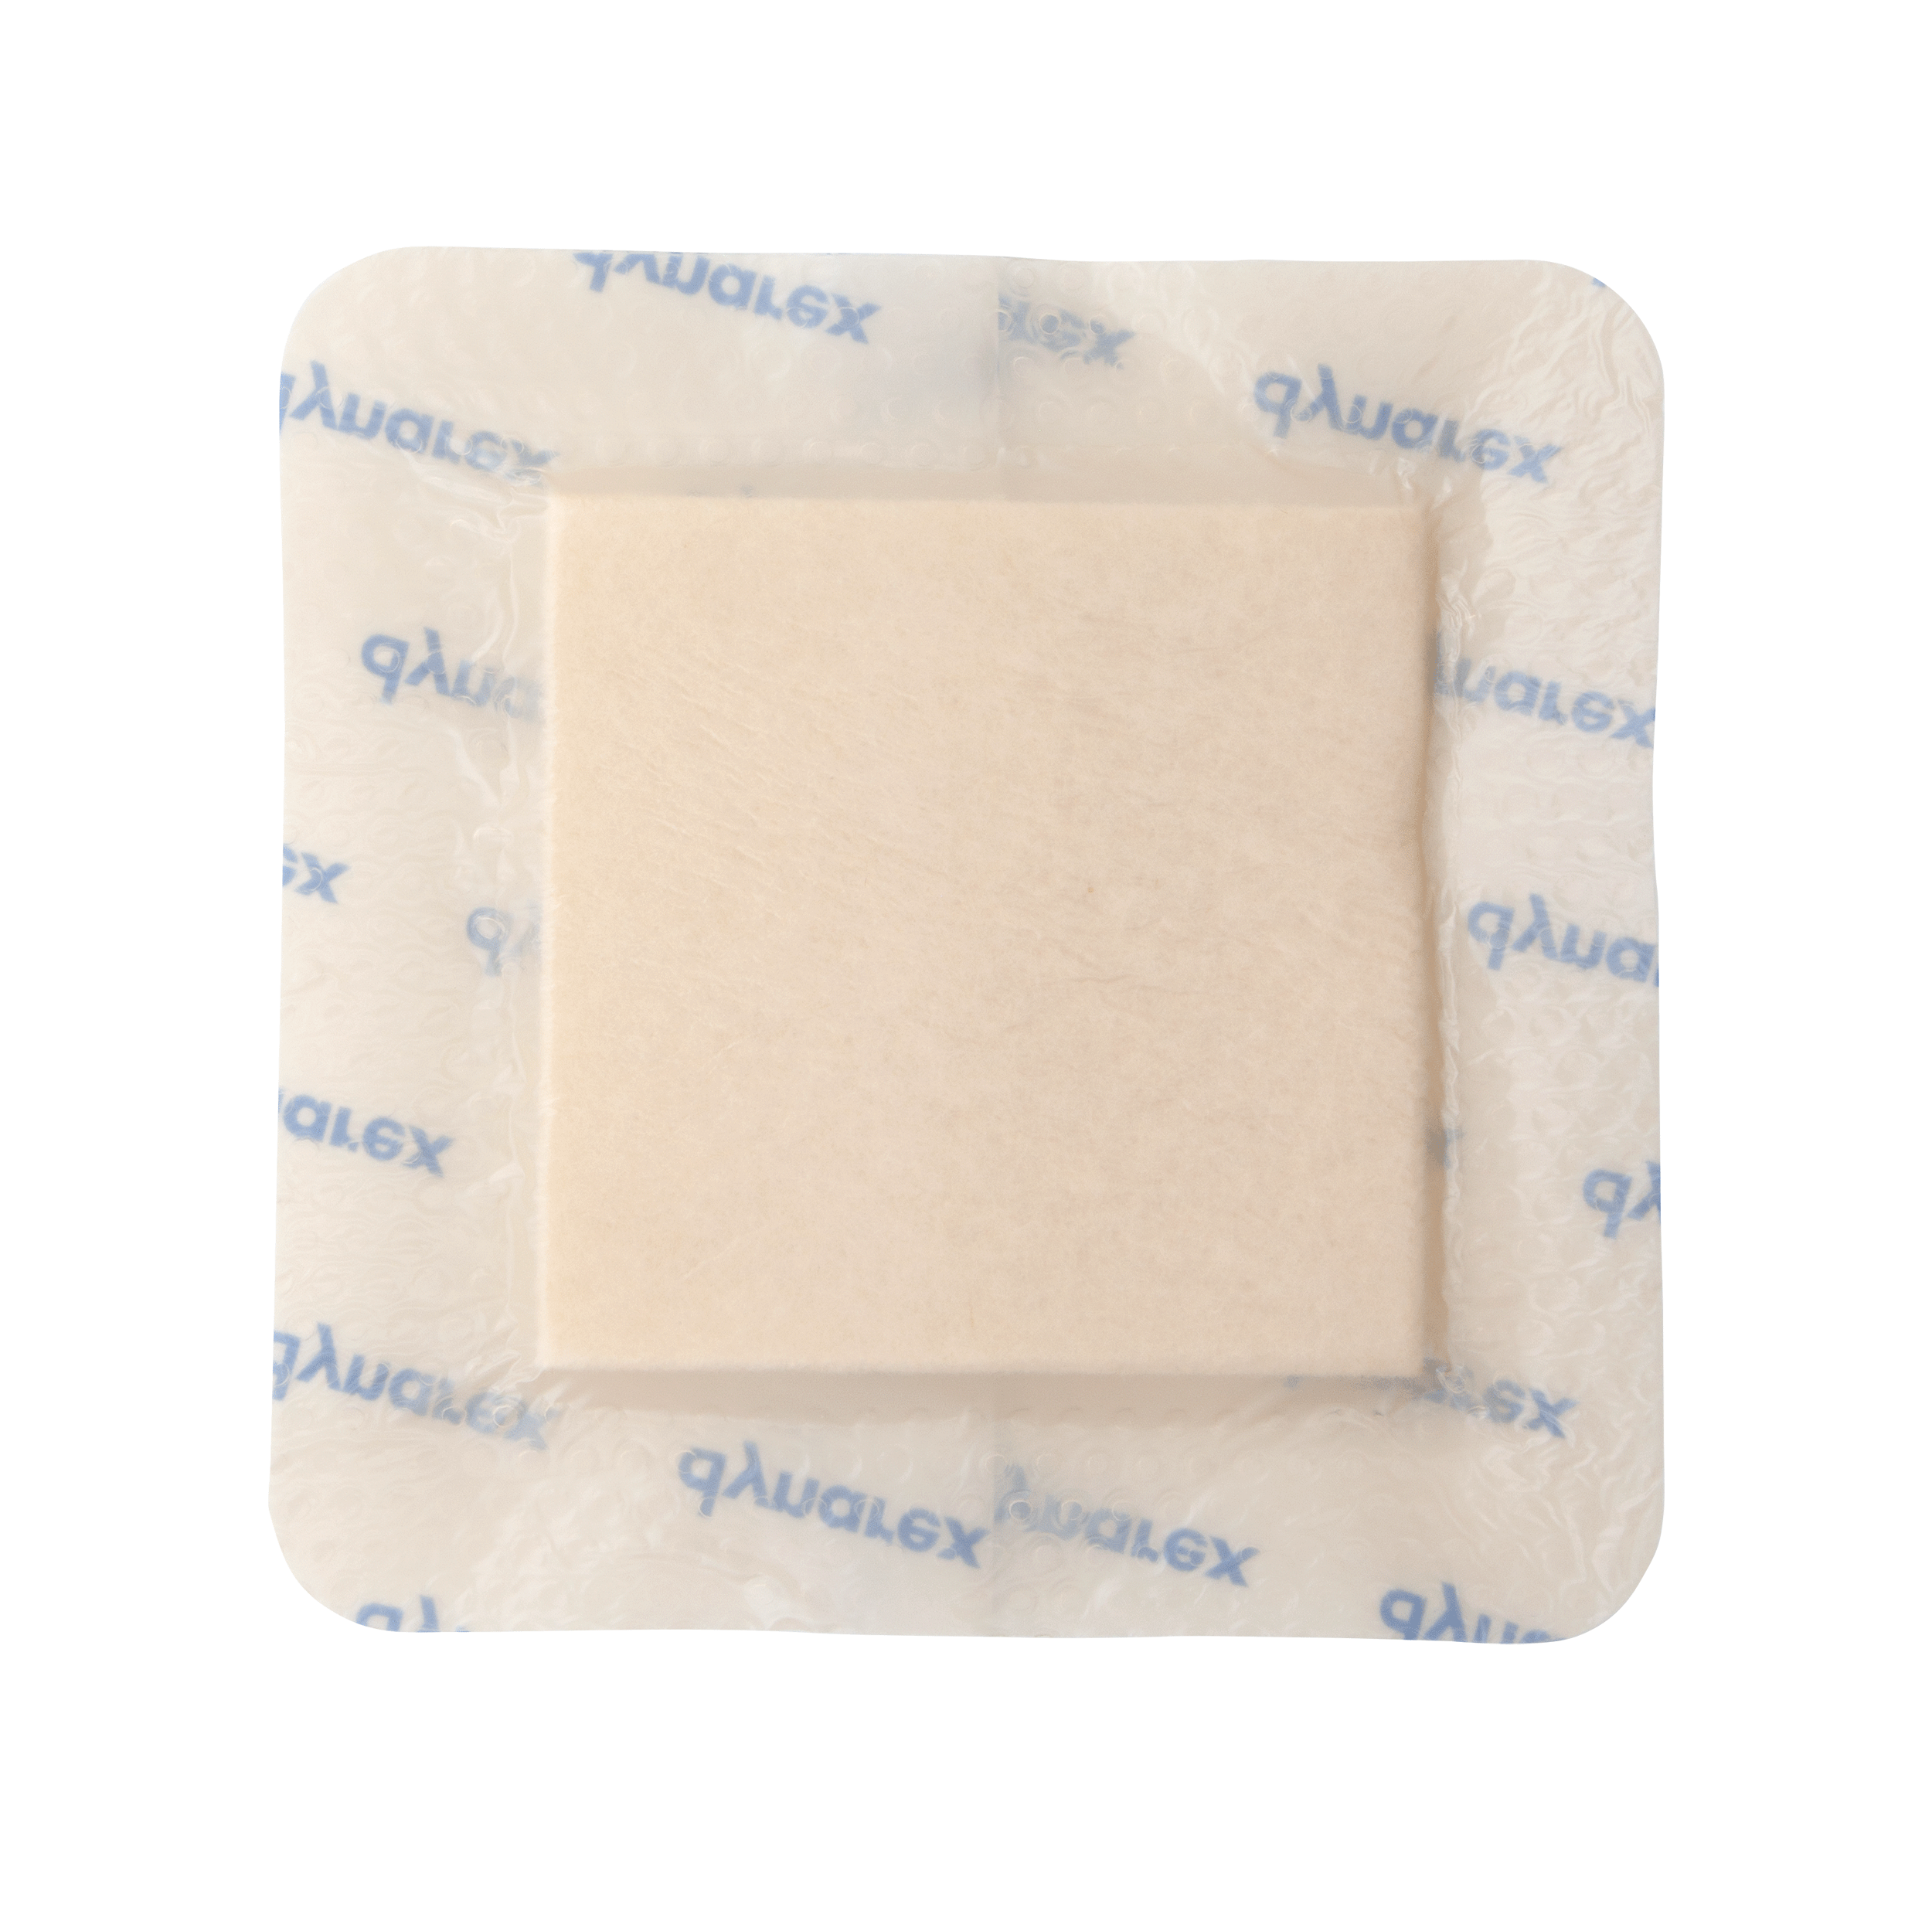 SiliGentle™ AG Silver Silicone Bordered Foam Dressing - 4 x 4in